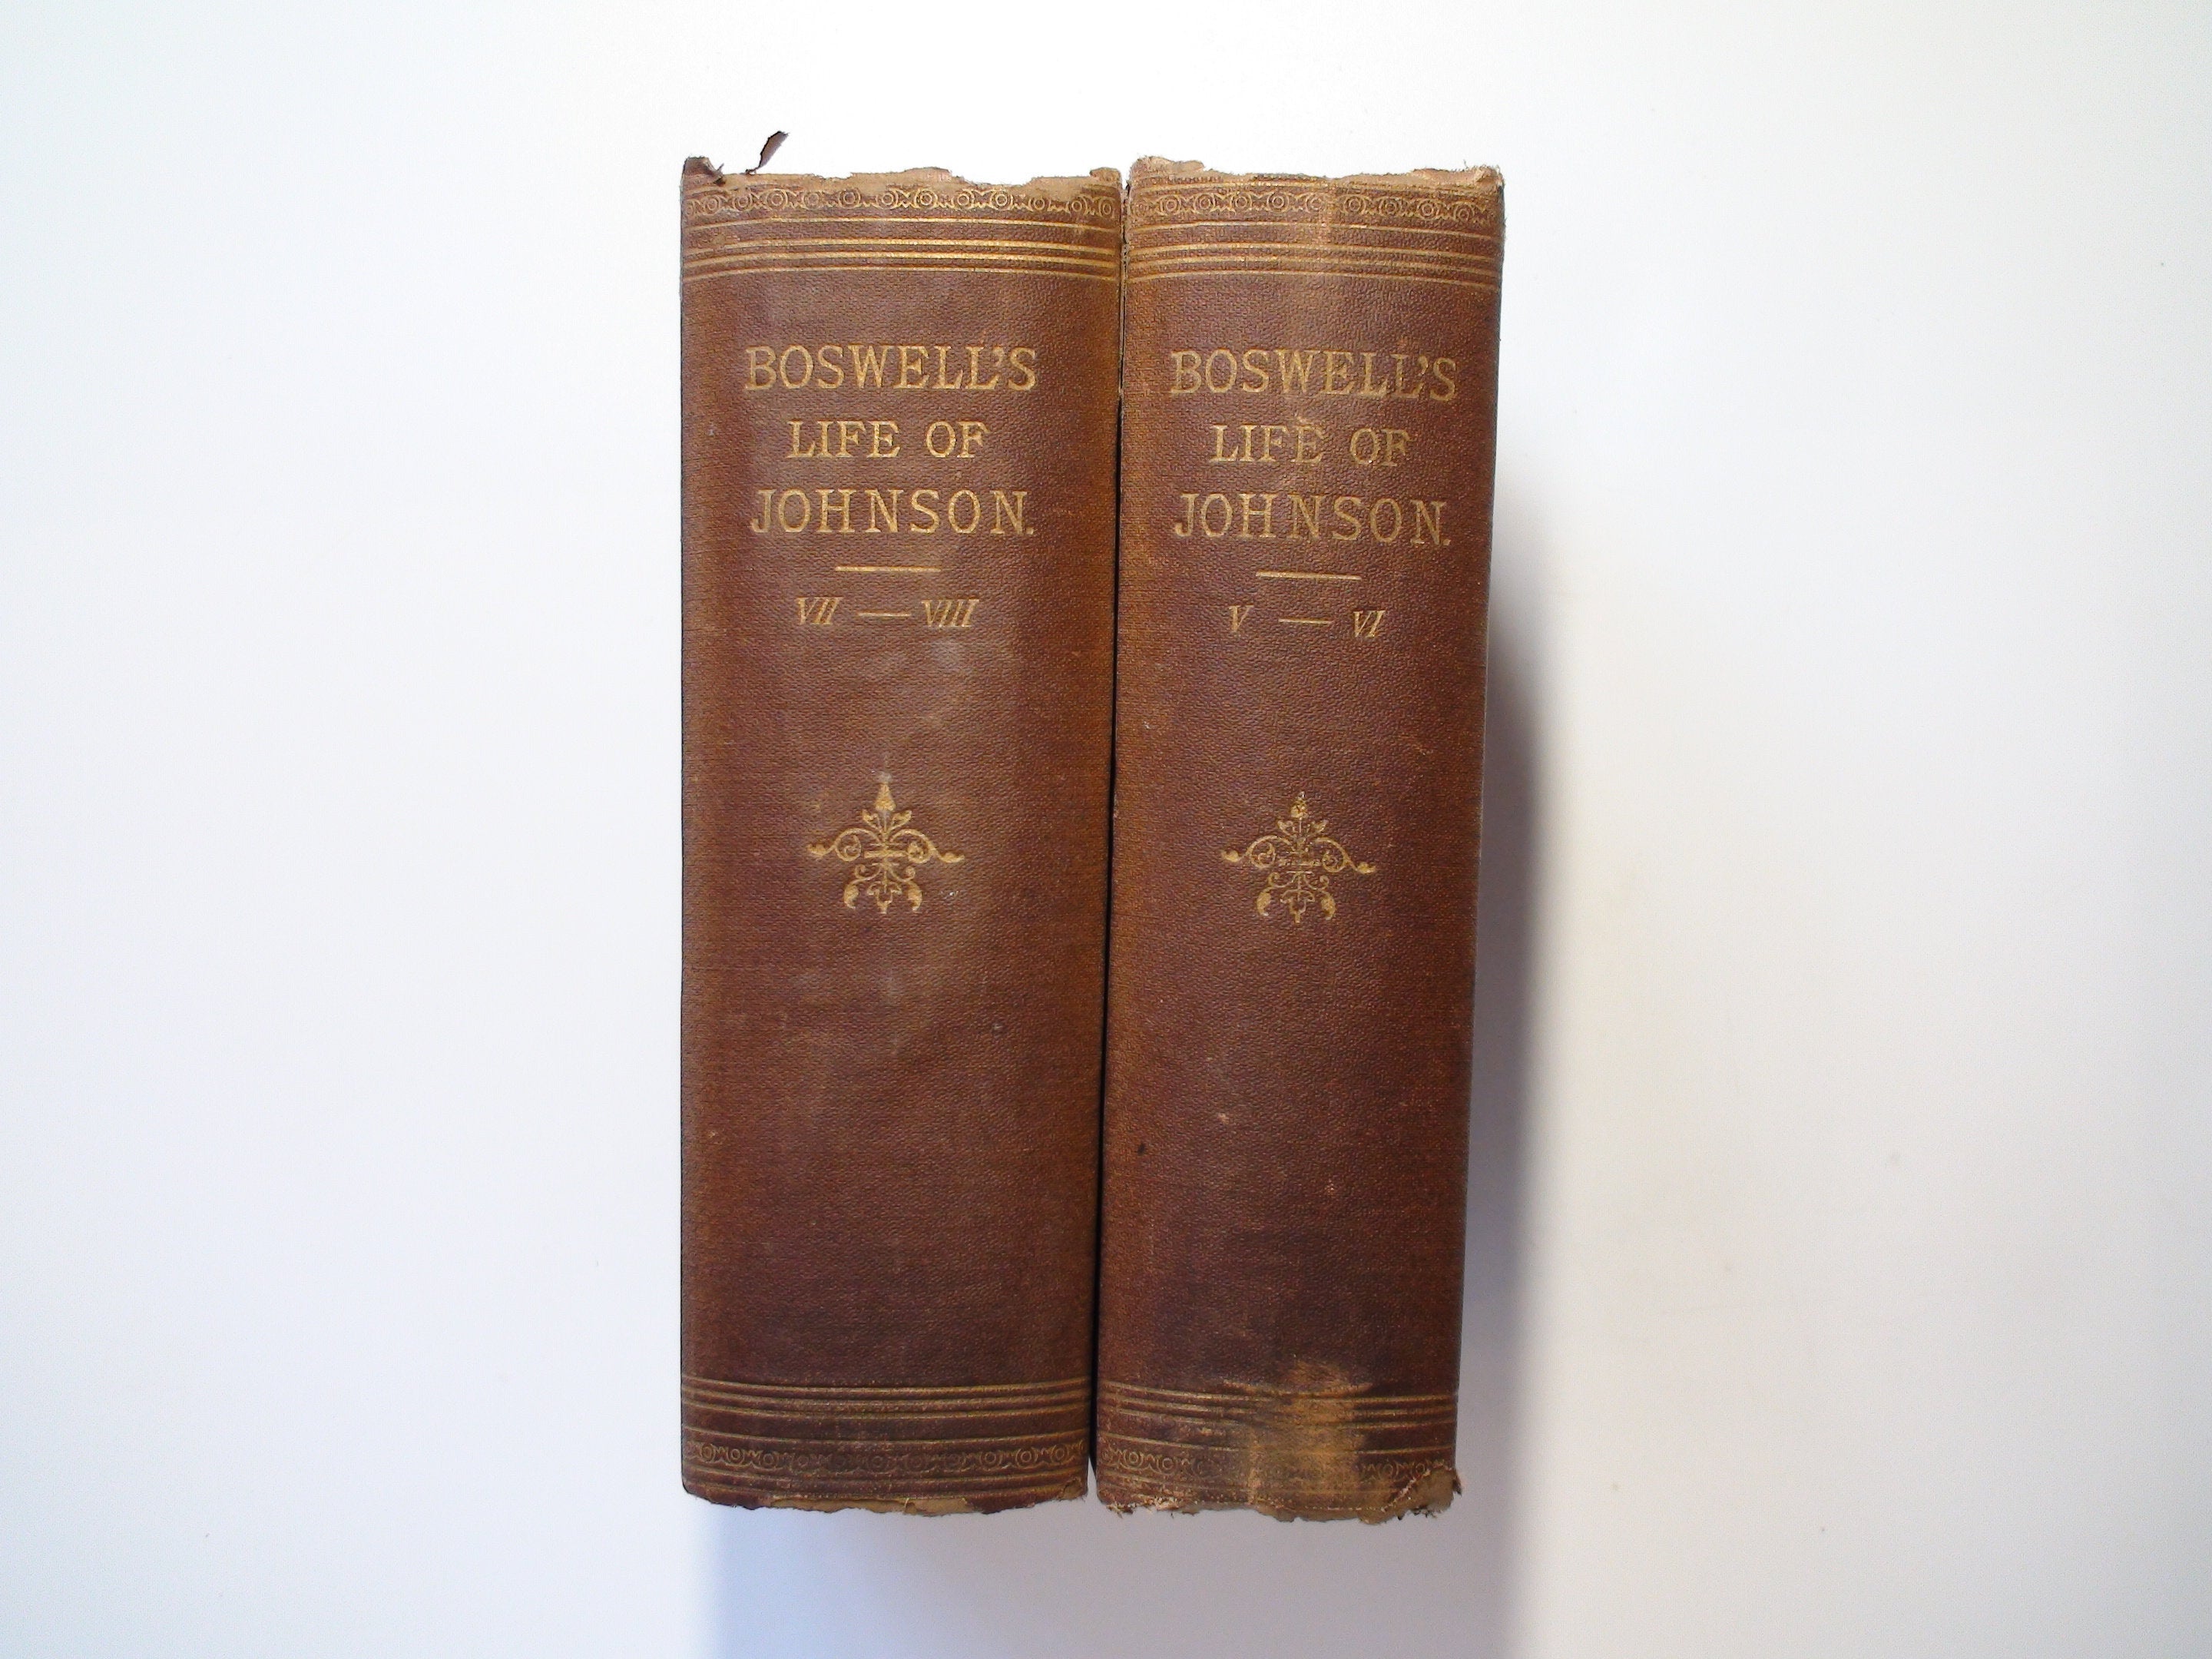 The Life of Samuel Johnson, LL. D., by James Boswell, Vol V, Vol VII, 1876